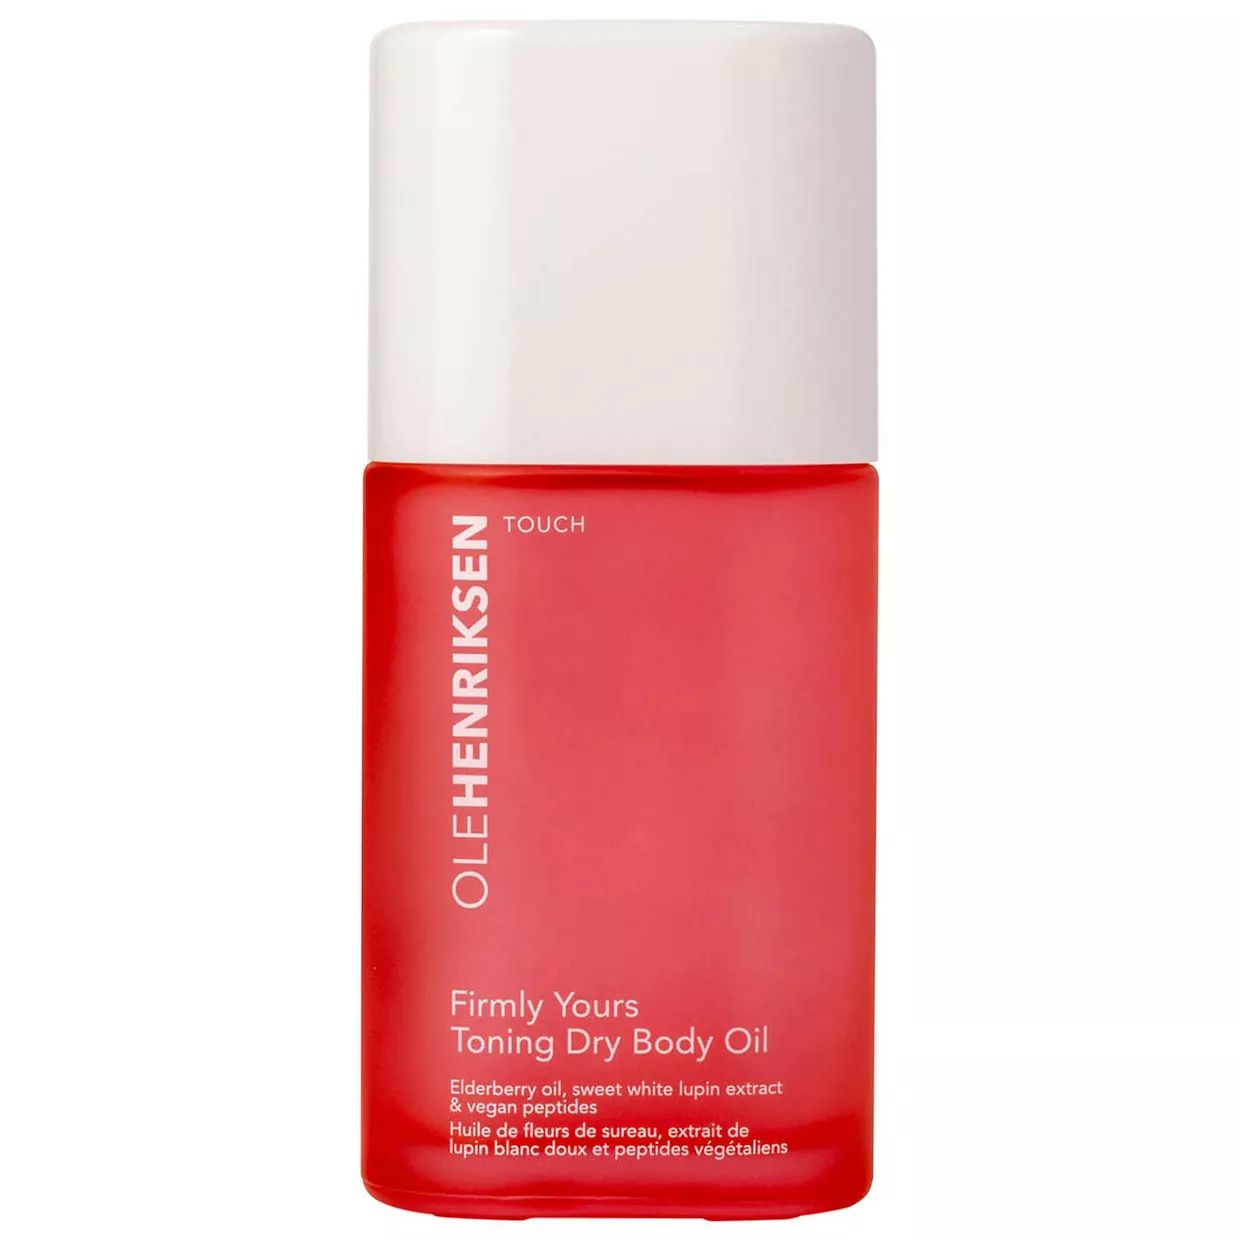 OLEHENRIKSEN Firmly Yours Dry Body Oil with Peptides | Kohl's